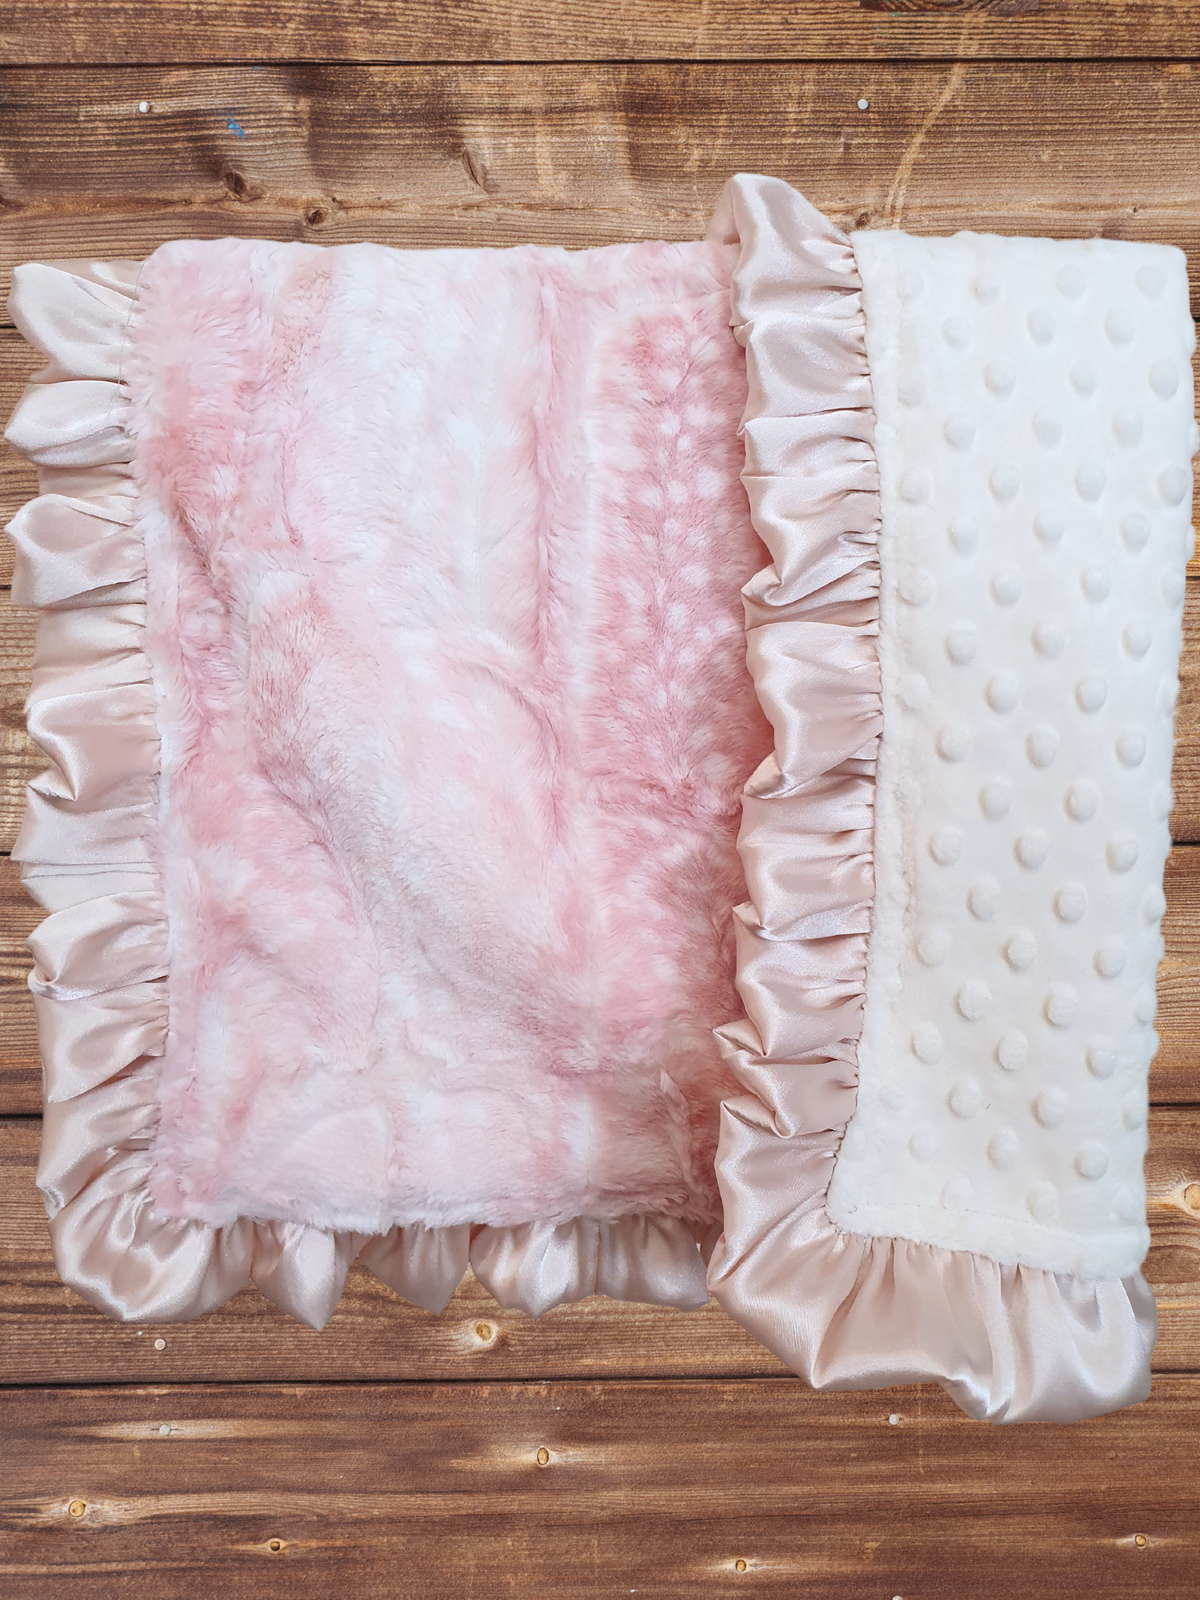 Baby Ruffle Lovey - Rosewater Fawn Minky and Ivory Woodland Lovey - DBC Baby Bedding Co 